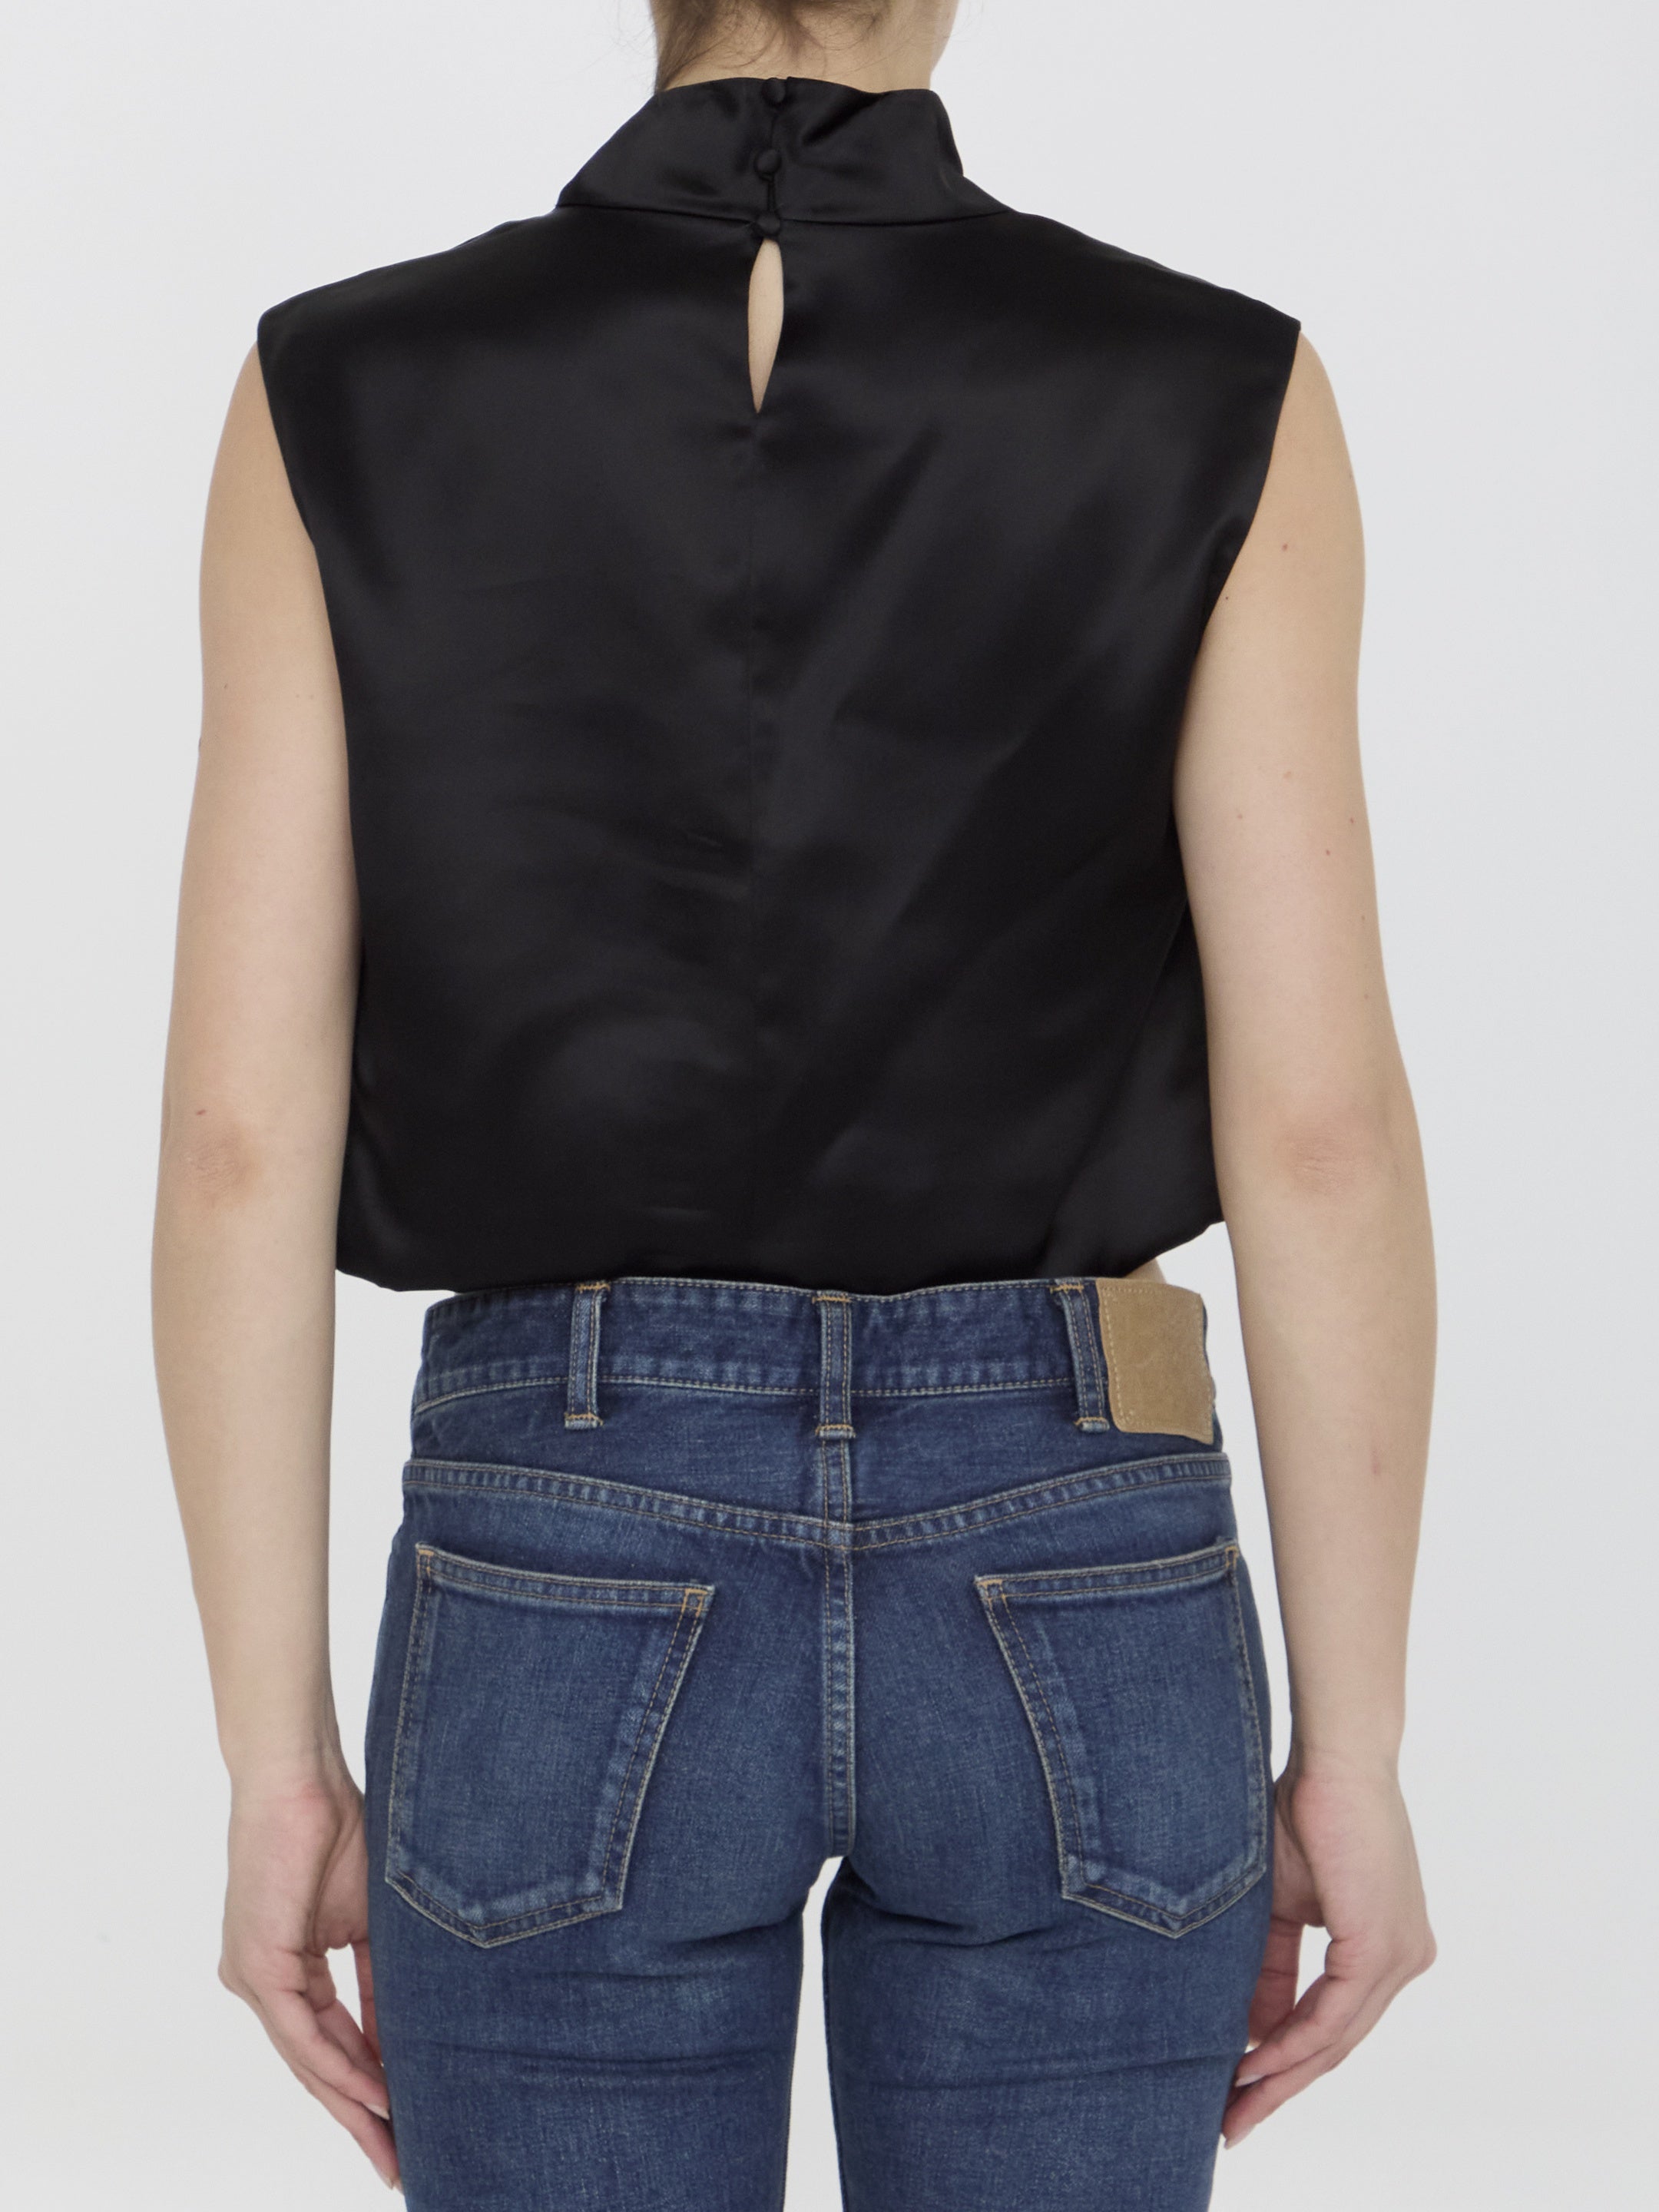 SAINT-LAURENT-OUTLET-SALE-Crop-top-in-satin-Shirts-ARCHIVE-COLLECTION-4.jpg